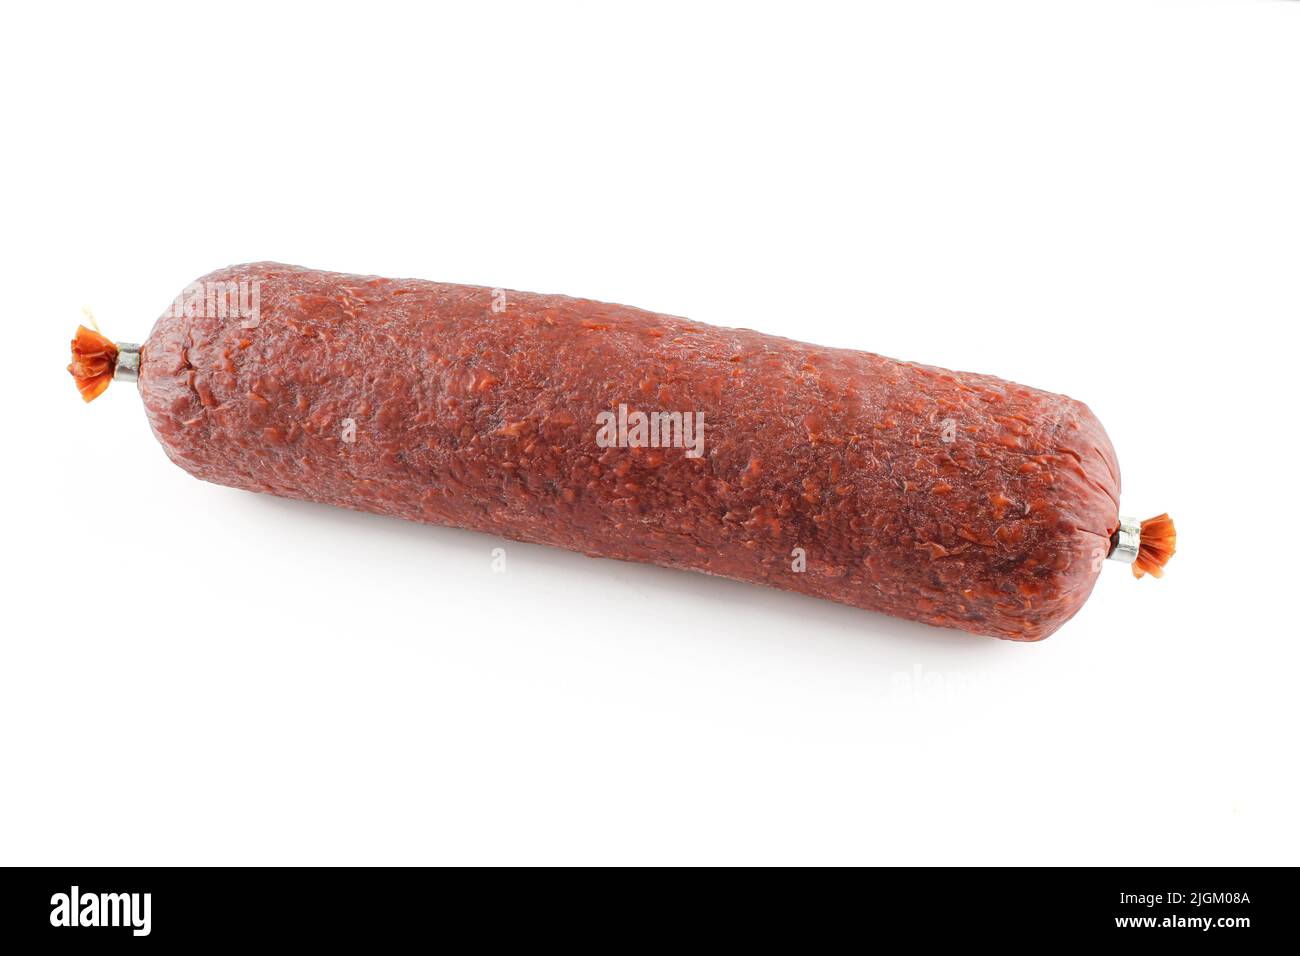 Smoked pepperoni beef sausage isolated on white background Stock Photo